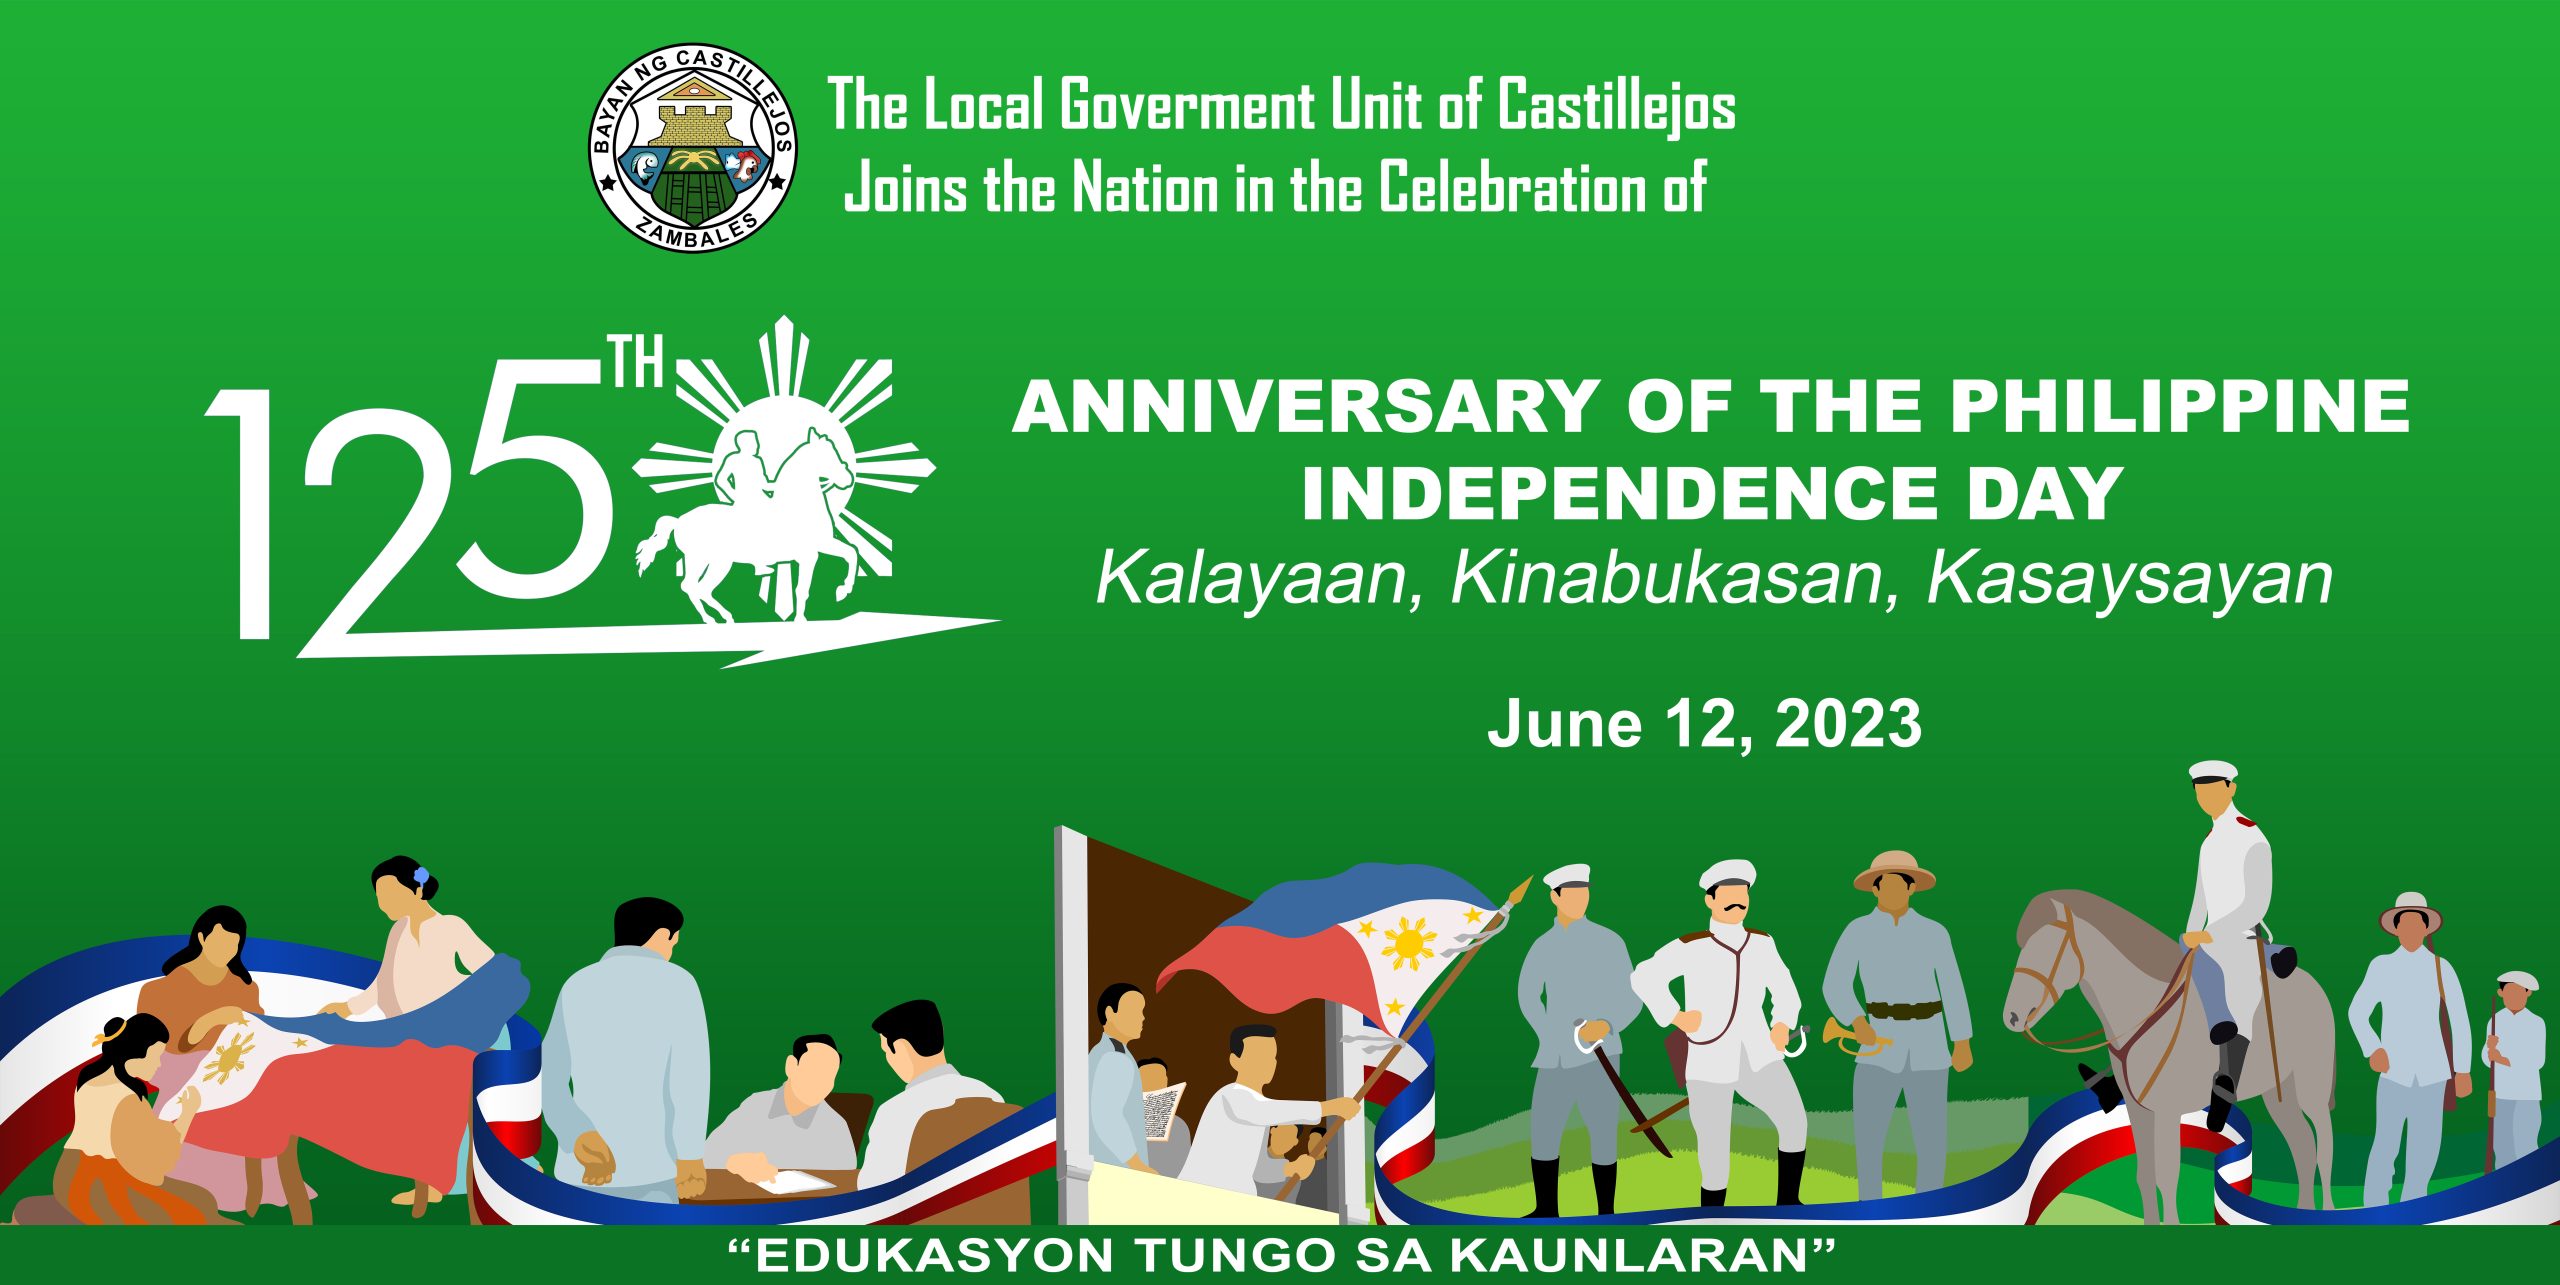 You are currently viewing The Local Government of Castillejos celebrates the 125th Anniversary of Philippine Independence Day